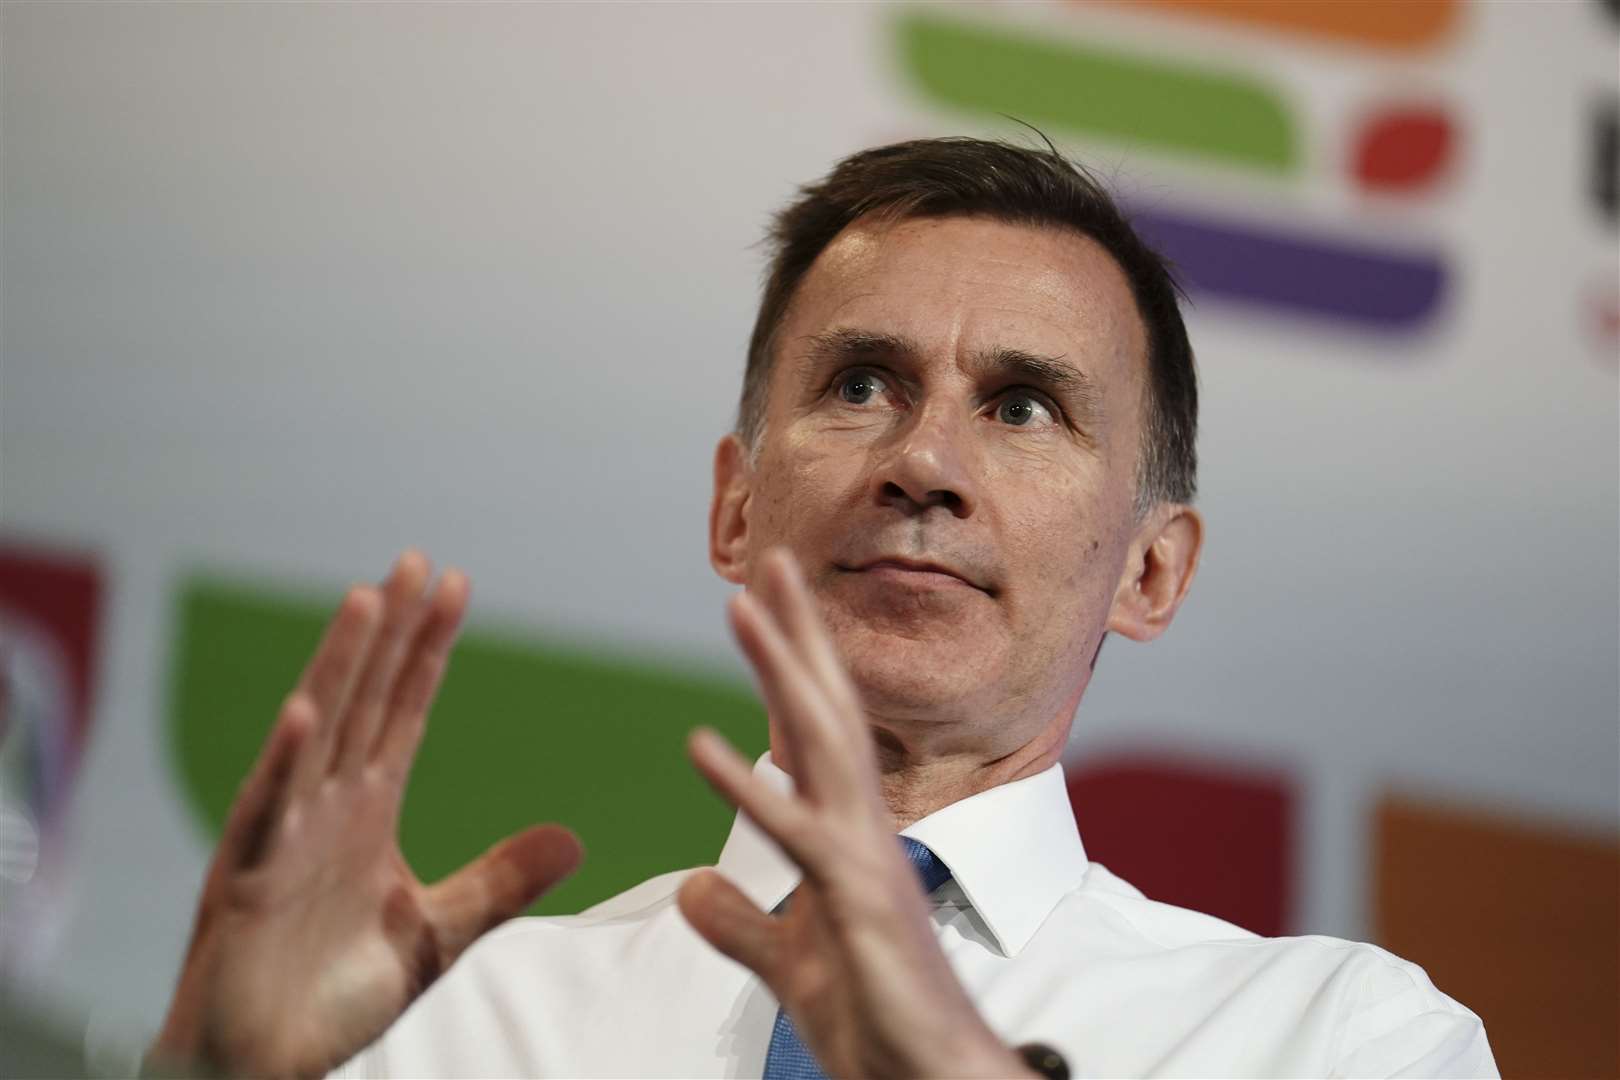 Chancellor of the Exchequer Jeremy Hunt, alongside the Prime Minister, has focused on boosting science in the UK (Jordan Pettitt/PA)